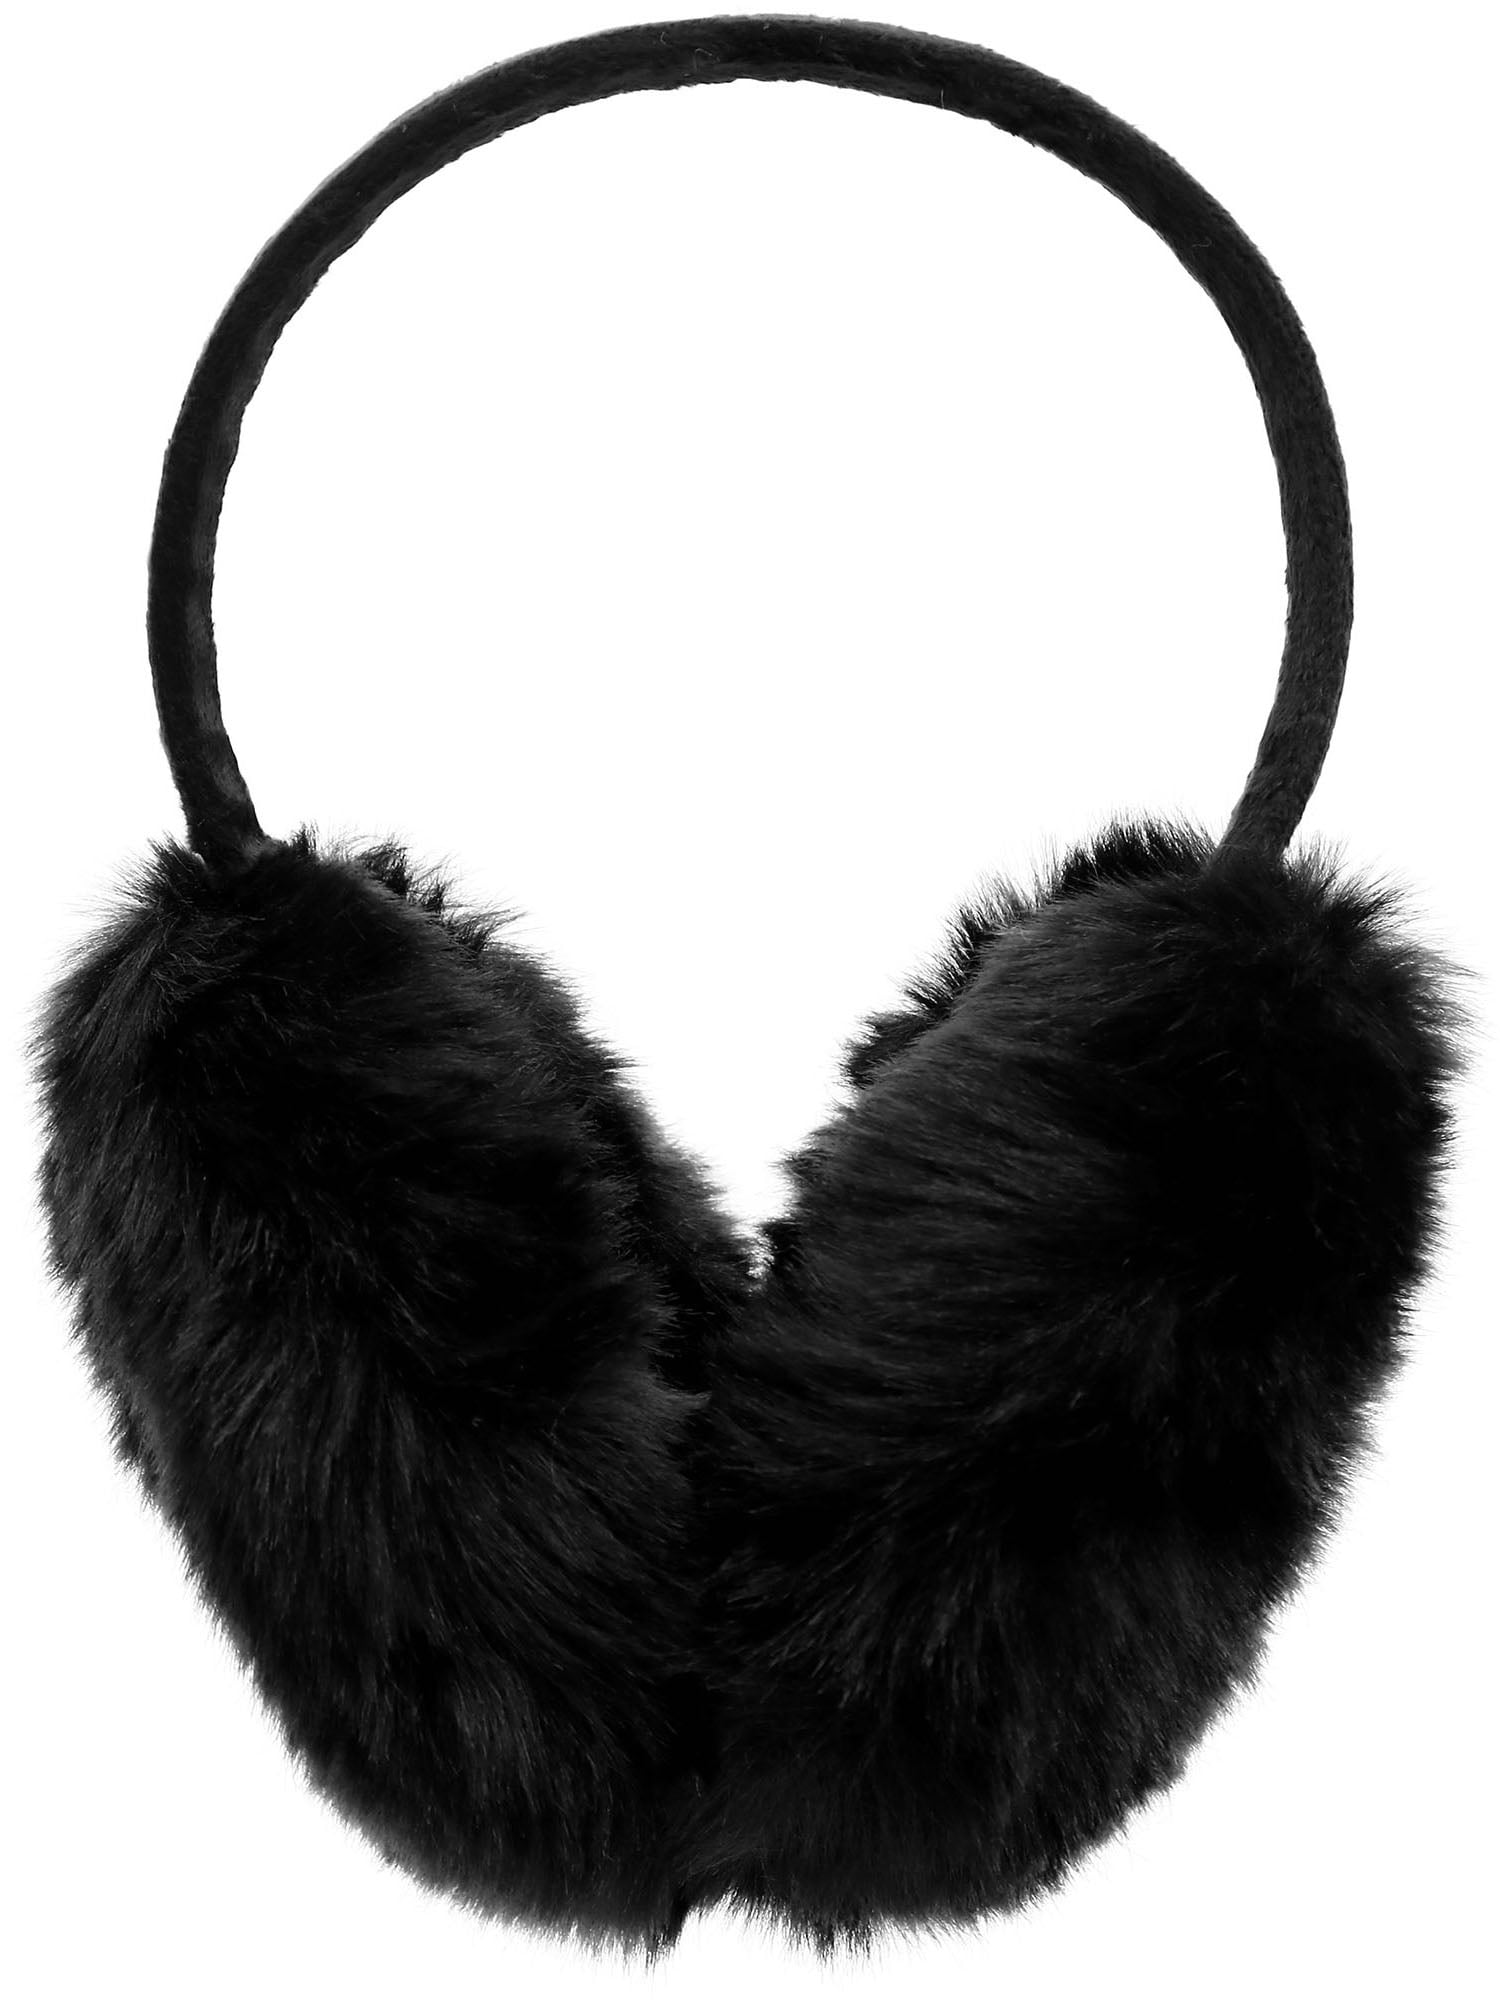 Sudawave Womens Winter Adjustable Knitted Ear Muffs With Faux Furry Outdoor Ear warmers